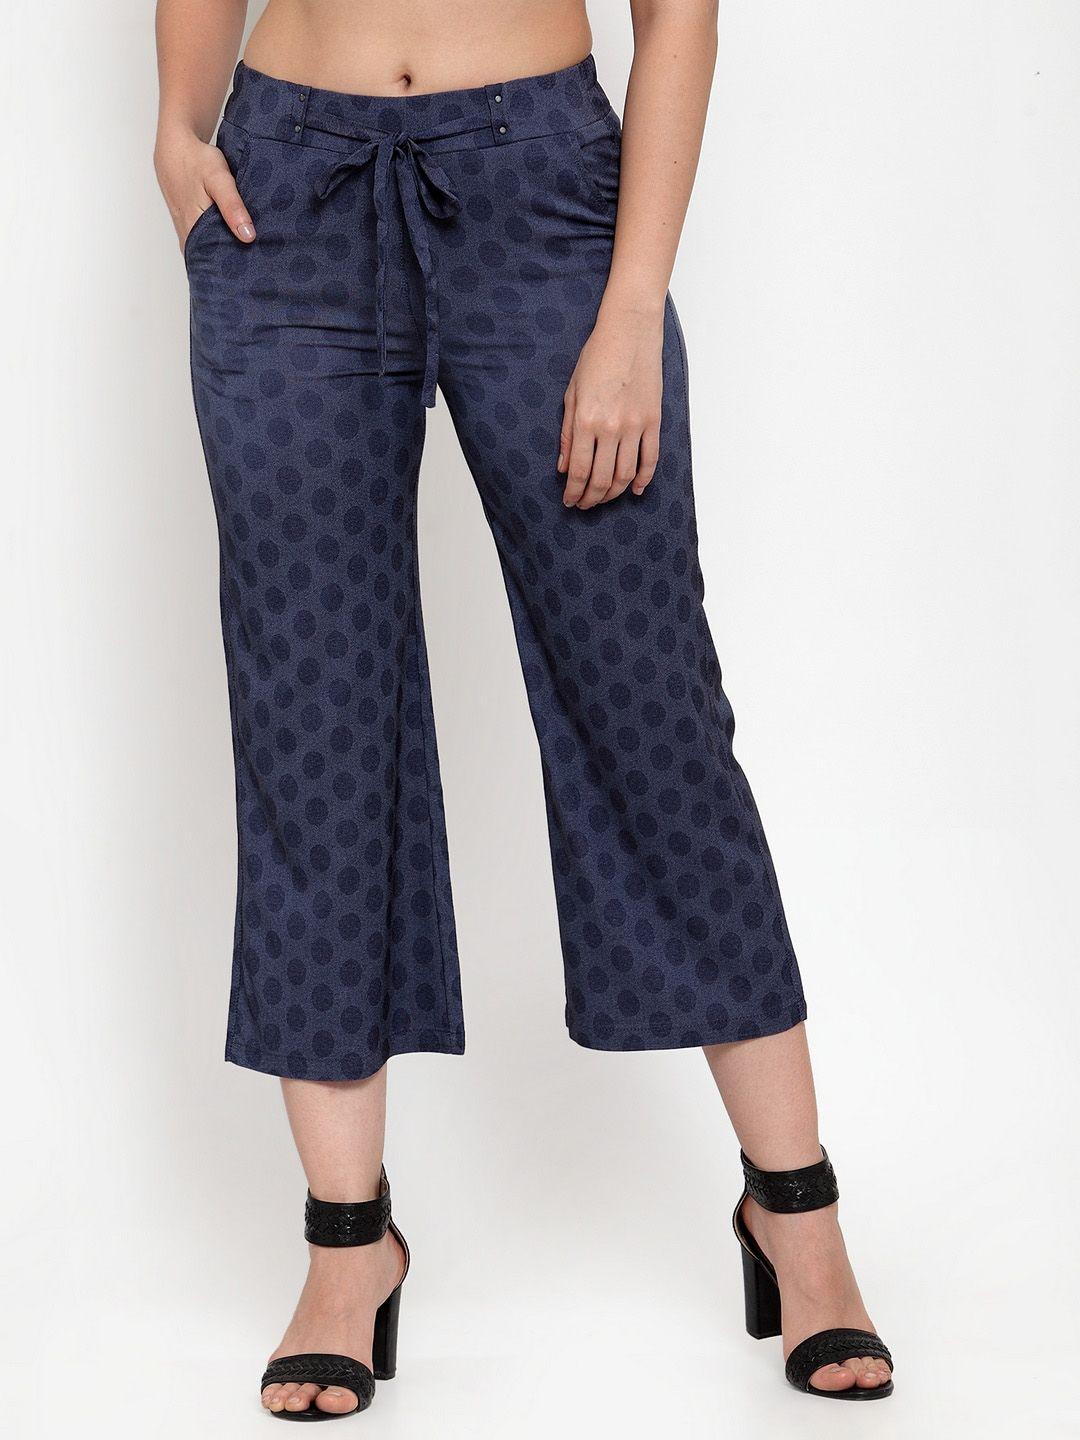 westwood women blue printed mid rise smart culottes trousers